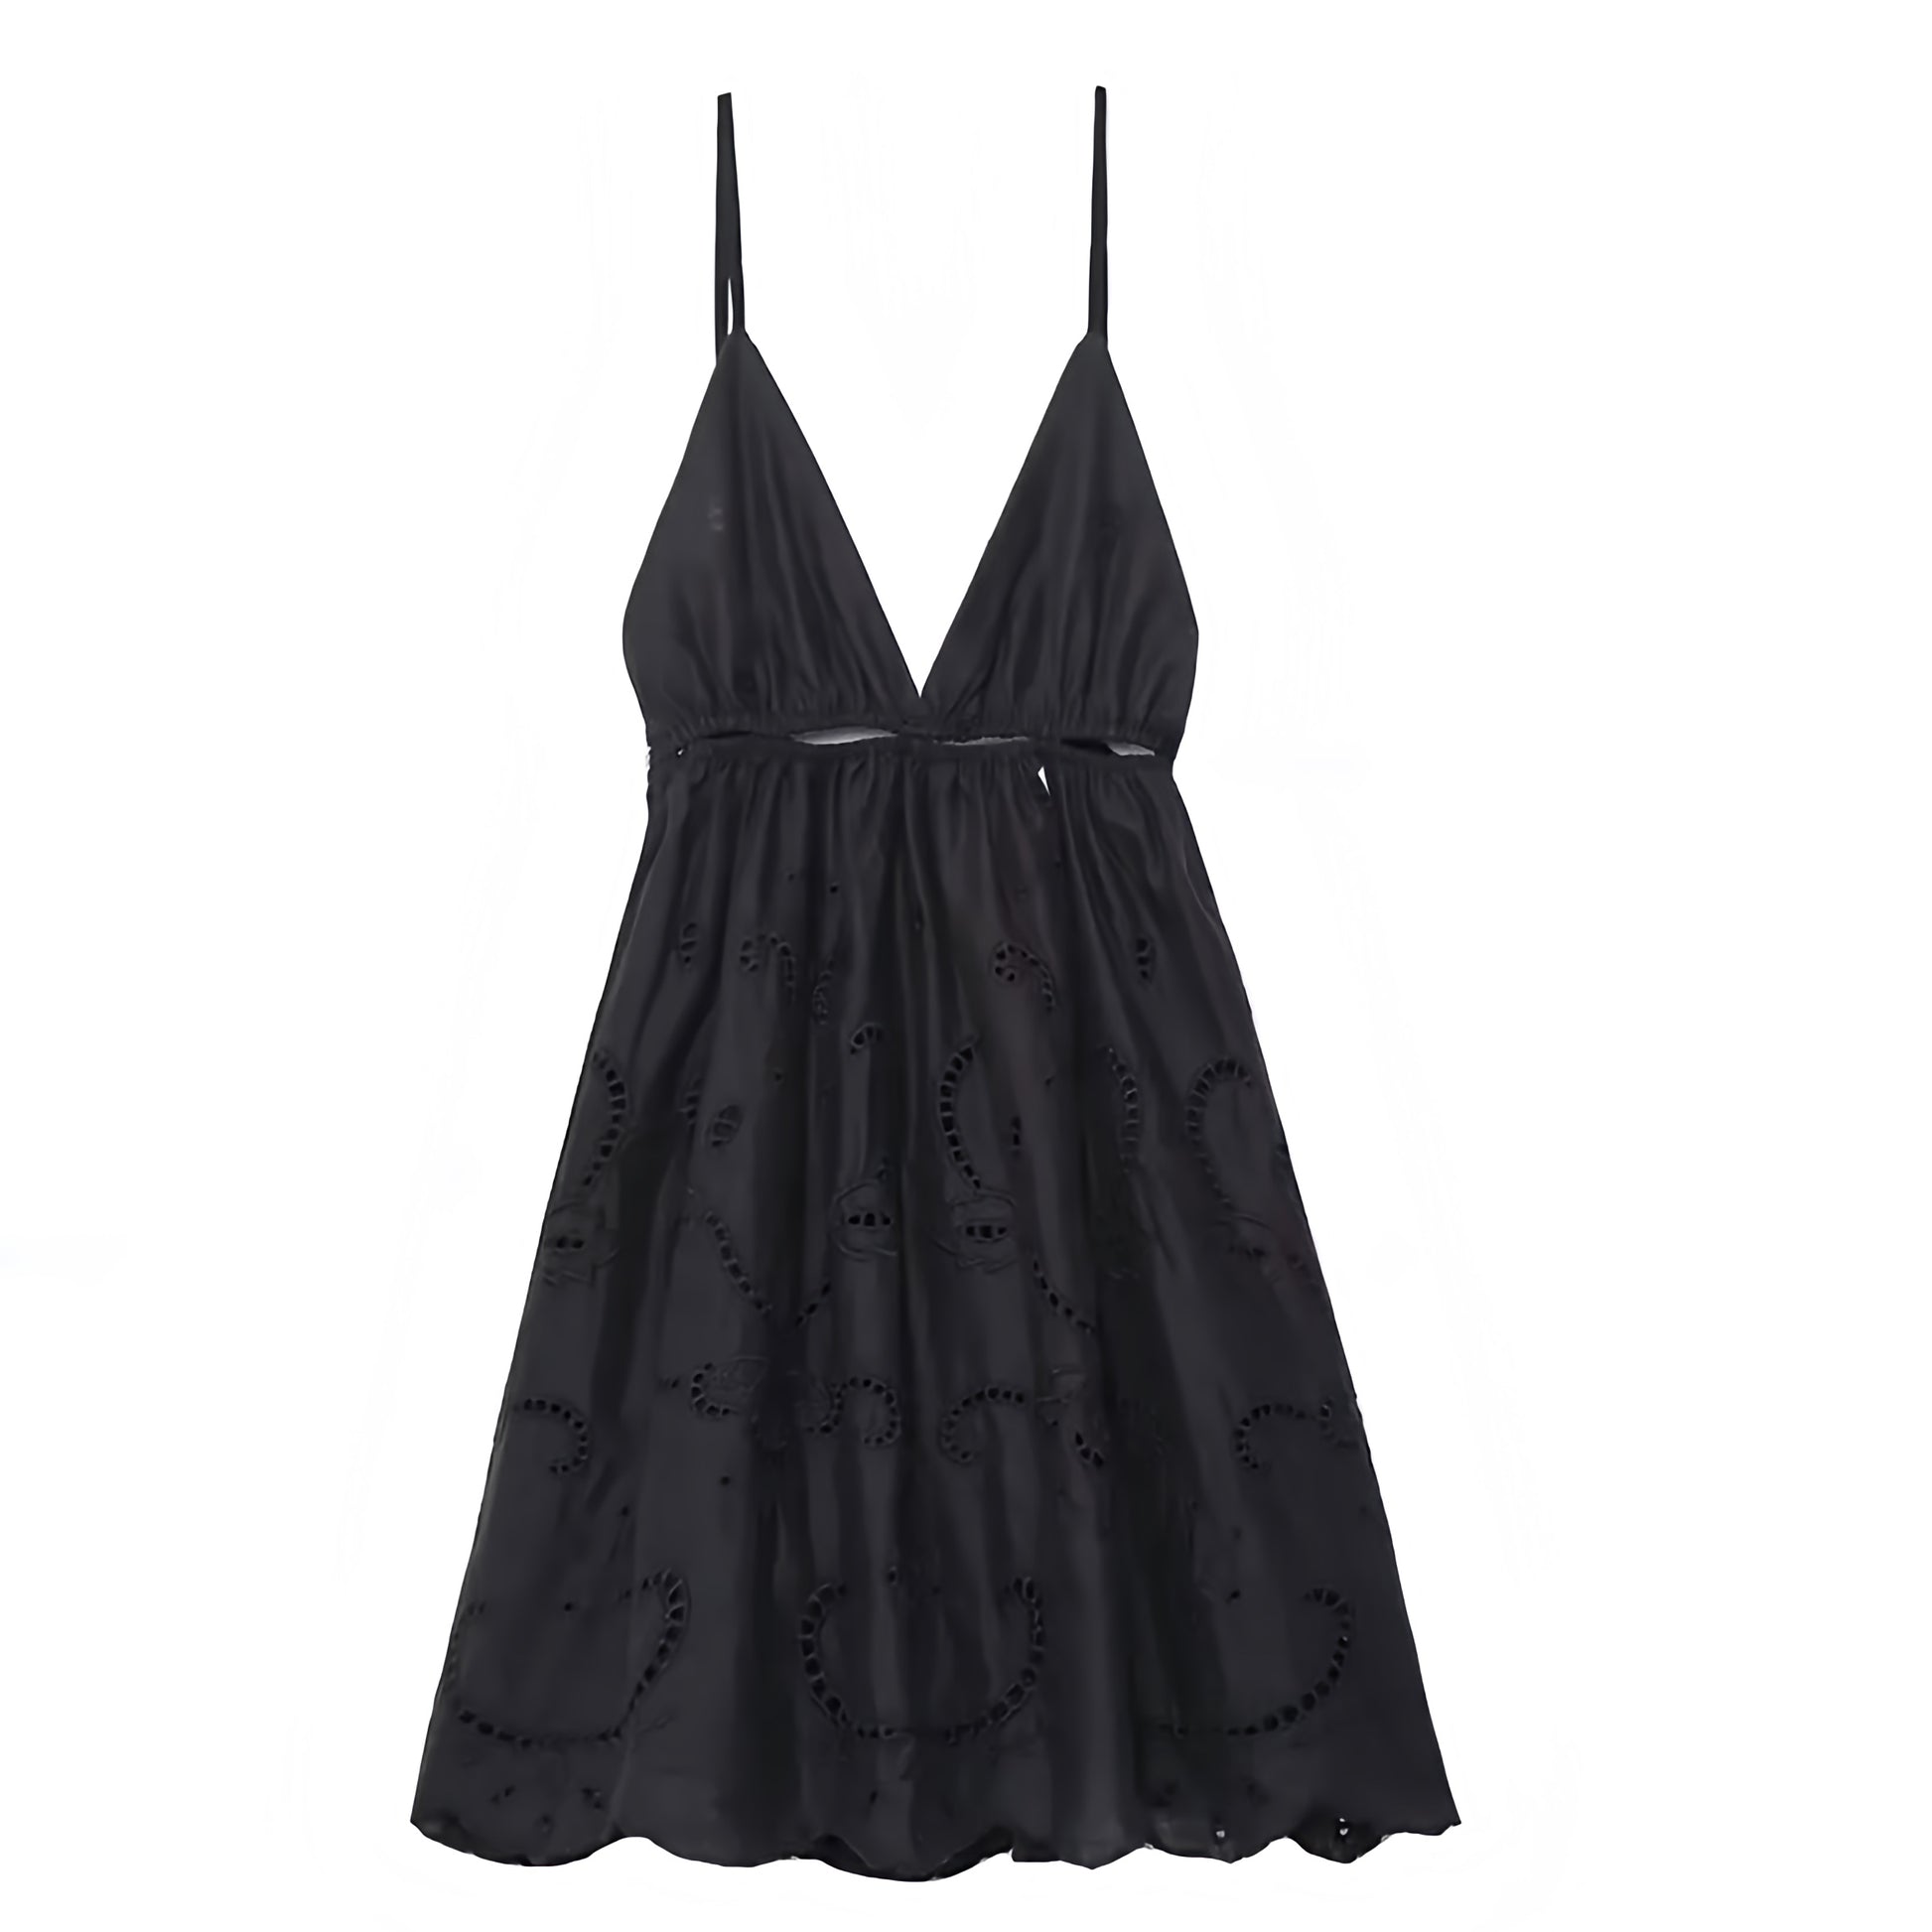 black-eyelet-embroidered-pointelle-broderie-patterned-slim-fit-drop-waist-cut-out-spaghetti-strap-deep-v-neck-sleeveless-backless-open-back-tiered-flowy-linen-boho-bohemian-short-mini-dress-evening-gown-women-ladies-teens-tweens-chic-trendy-spring-2024-summer-elegant-semi-formal-casual-feminine-preppy-style-prom-homecoming-hoco-cocktail-party-wedding-guest-tropical-hawaiian-island-european-vacation-beach-wear-sundress-revolve-zara-aritzia-urban-outfitters-pacsun-charo-ruiz-altard-state-loveshackfancy-dupe